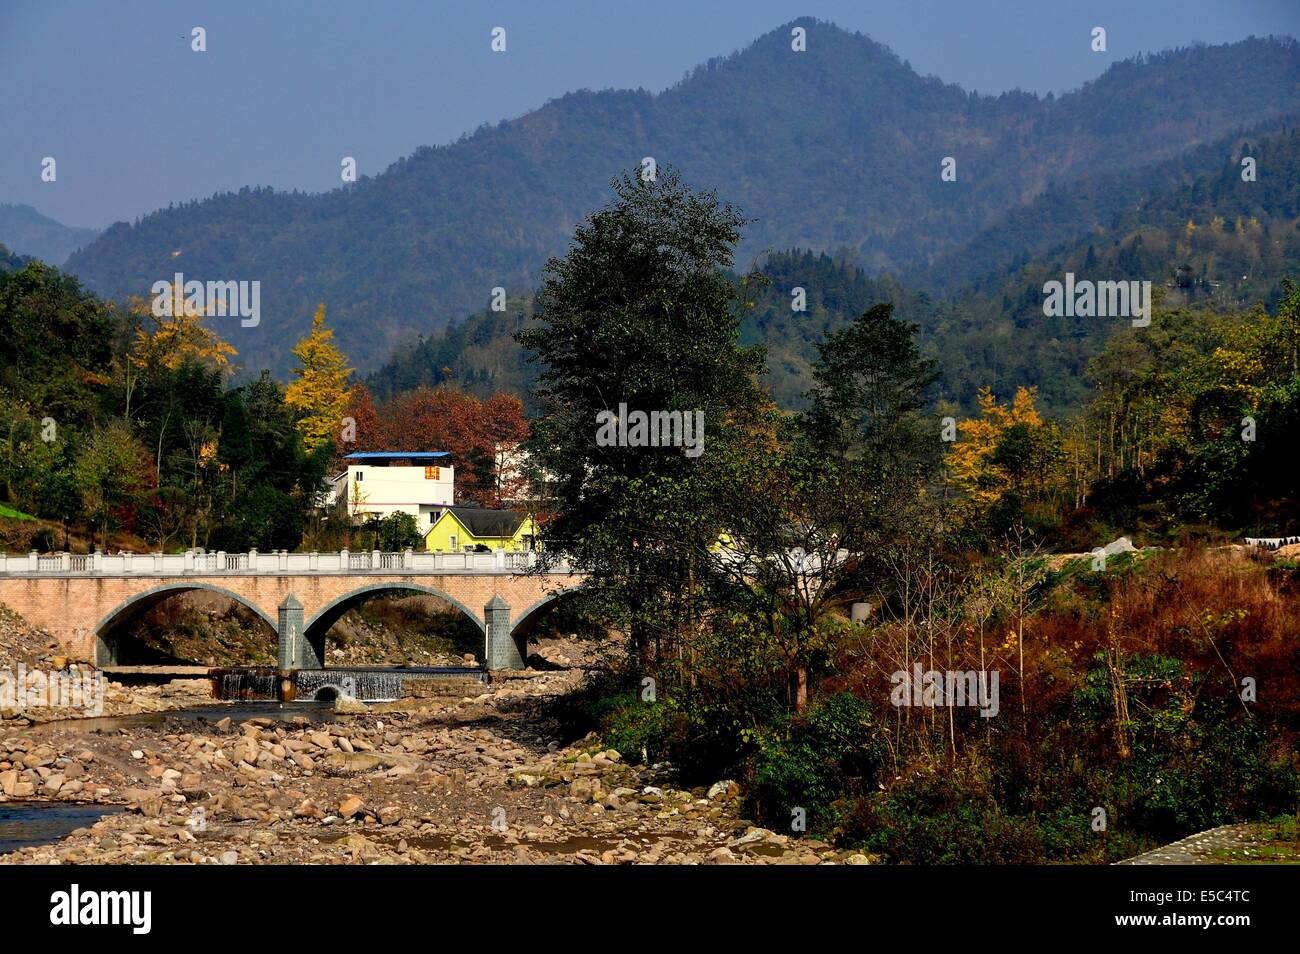 SICHUAN PROVINCE, CHINA:  A rocky river bed spanned by an arched bridge with distant mountains at Bai Lu Stock Photo